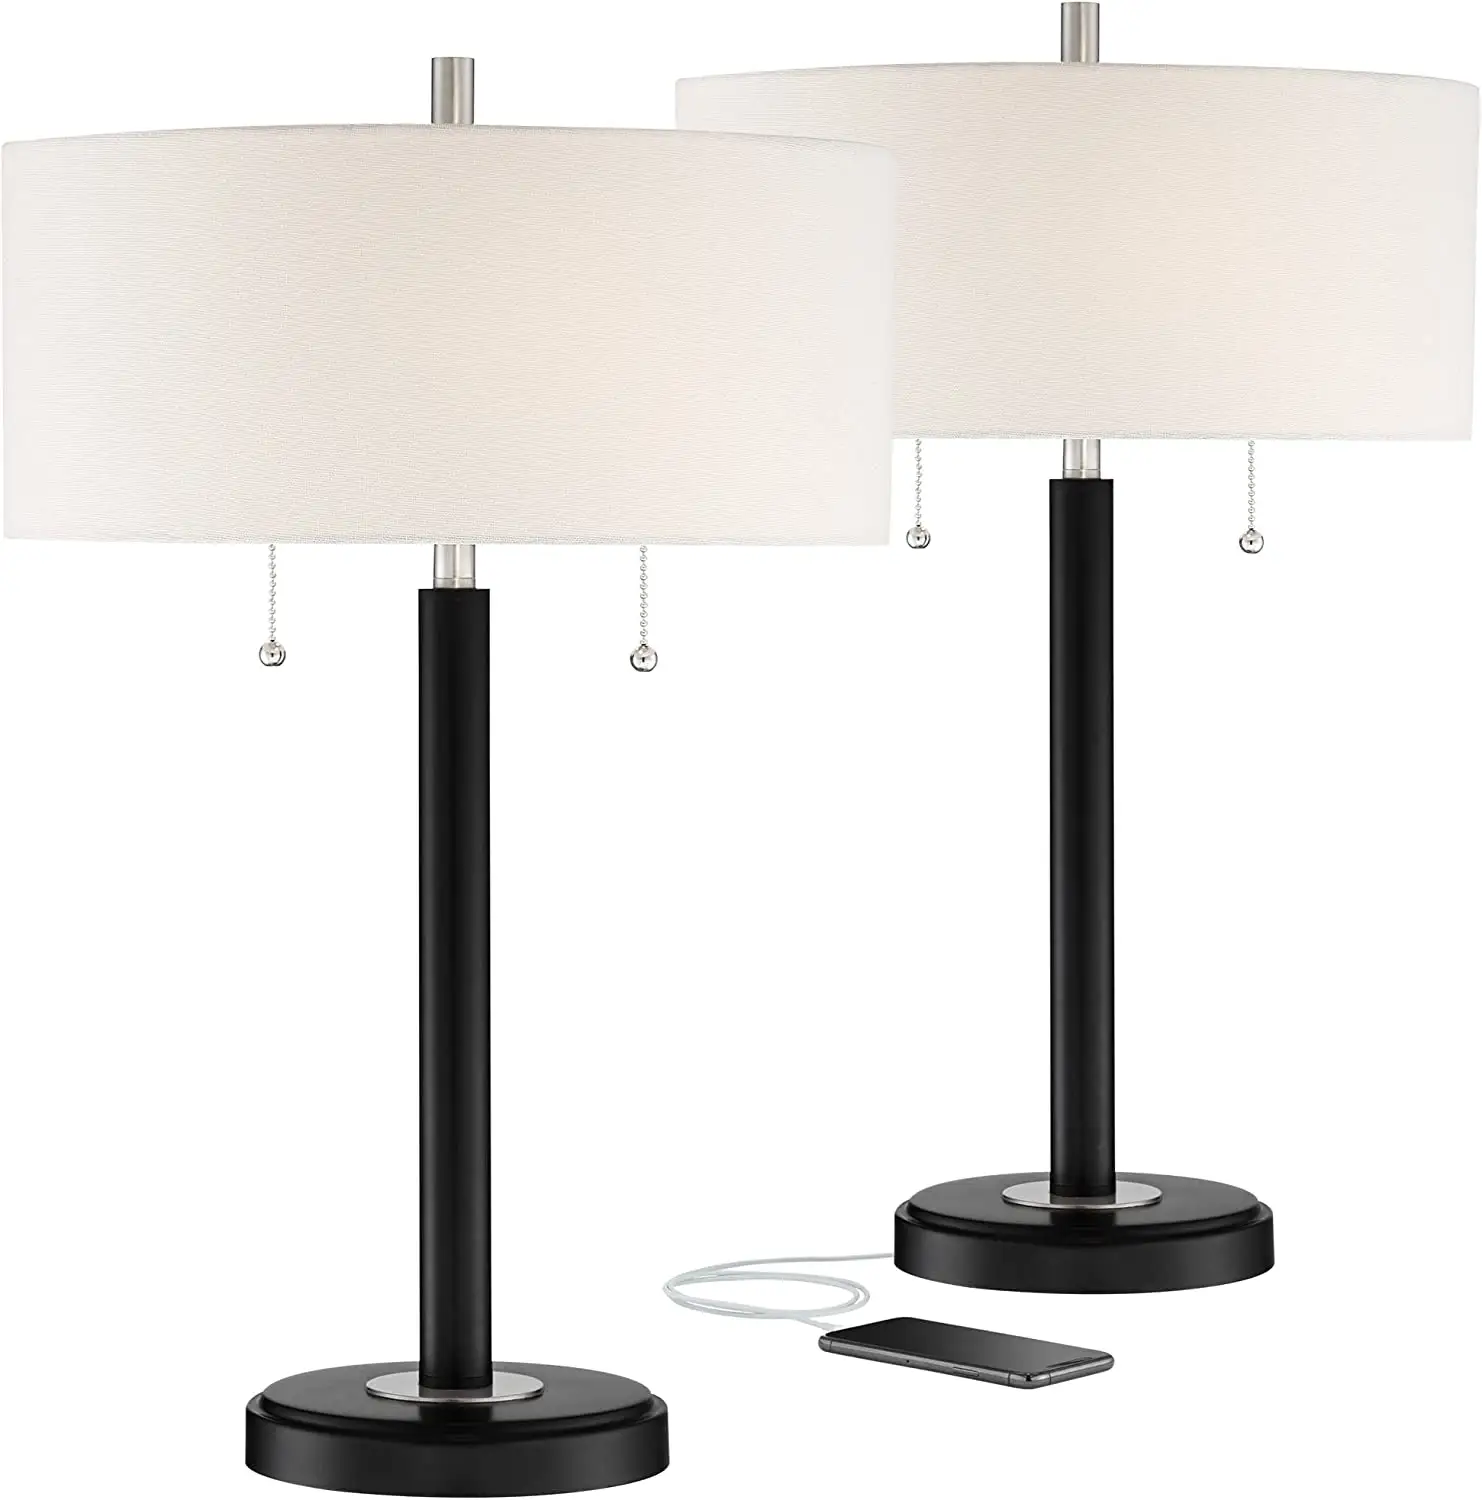 Table Lamps Set of 2 with USB Charging Port Black Metal White Fabric Drum Shade Decor for Living Room Desk Bedroom Hotel